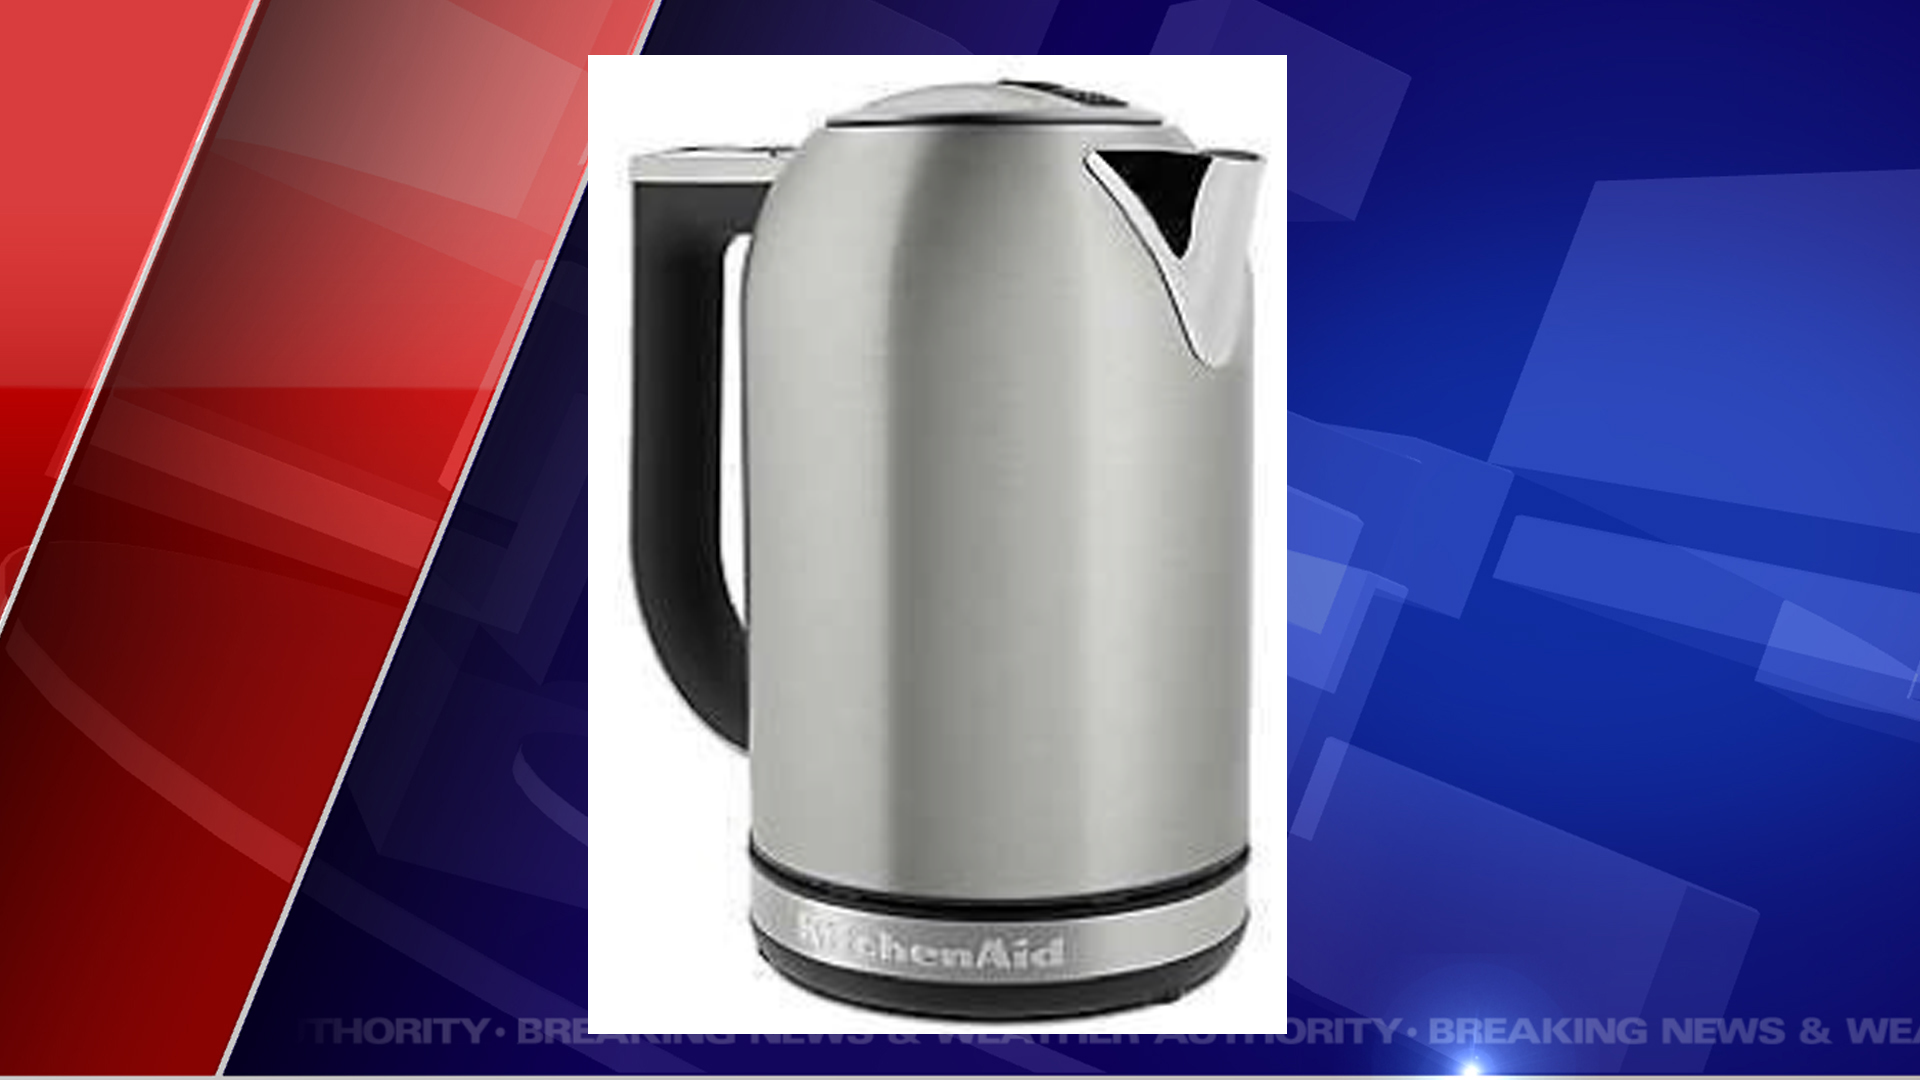 Whirlpool Recalls KitchenAid Electric Kettles Due to Burn Risk